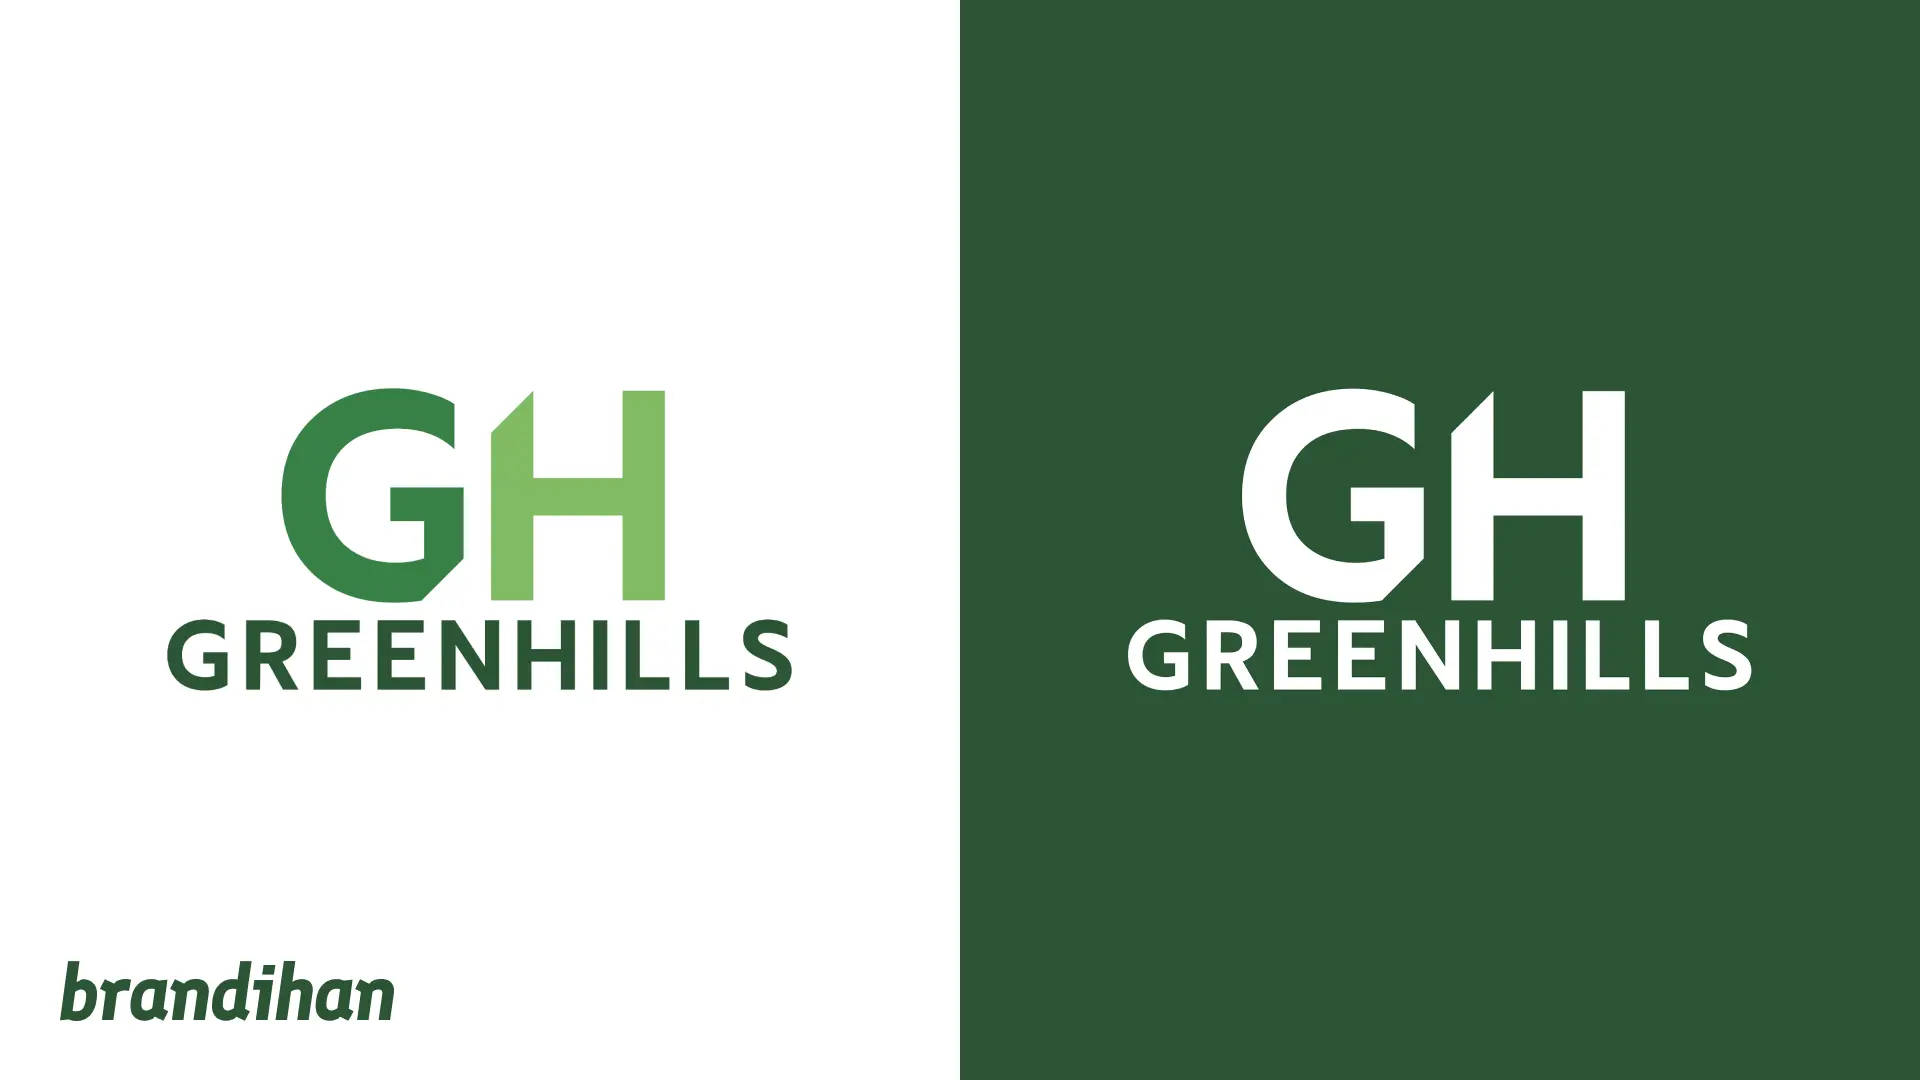 Greenhills (and its new logo) Ditches the Arc